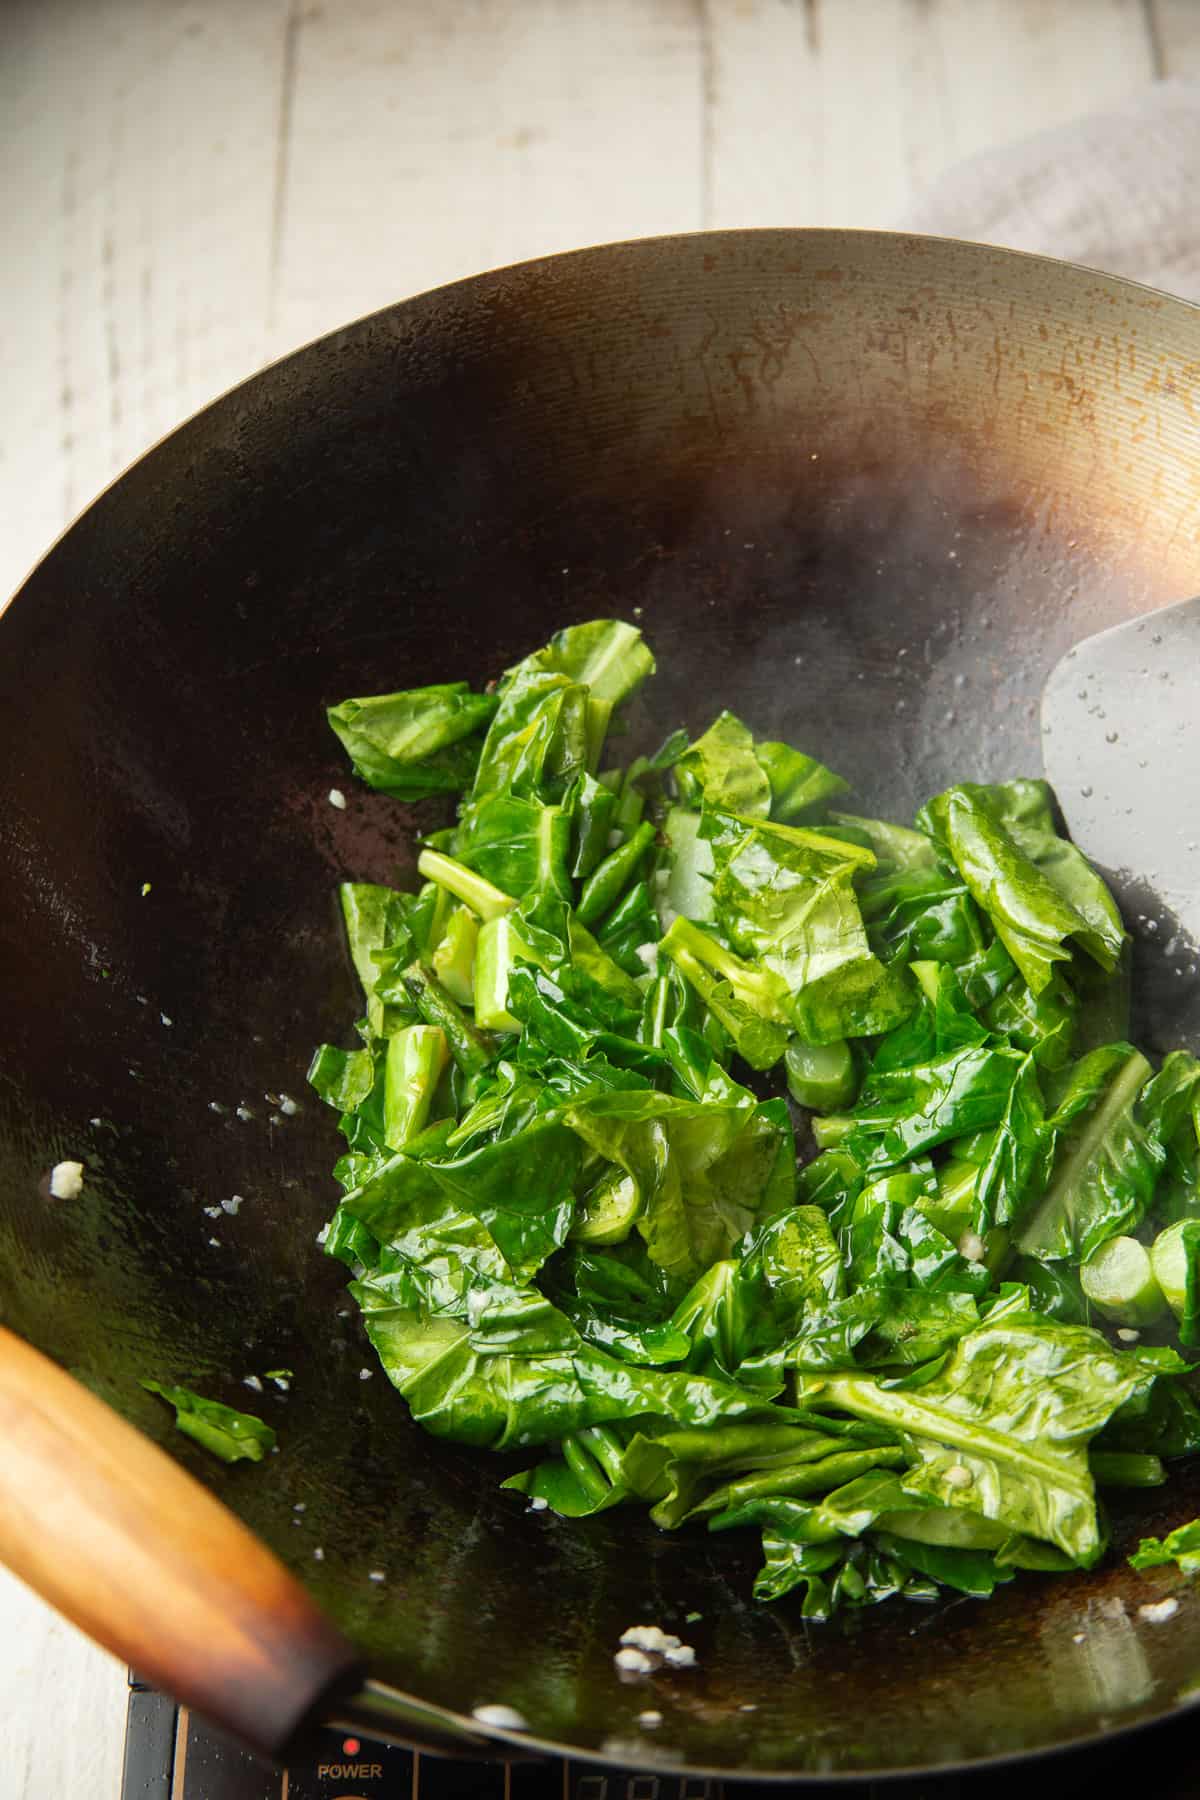 Chinese broccoli leaves and stems cooking in a wok.